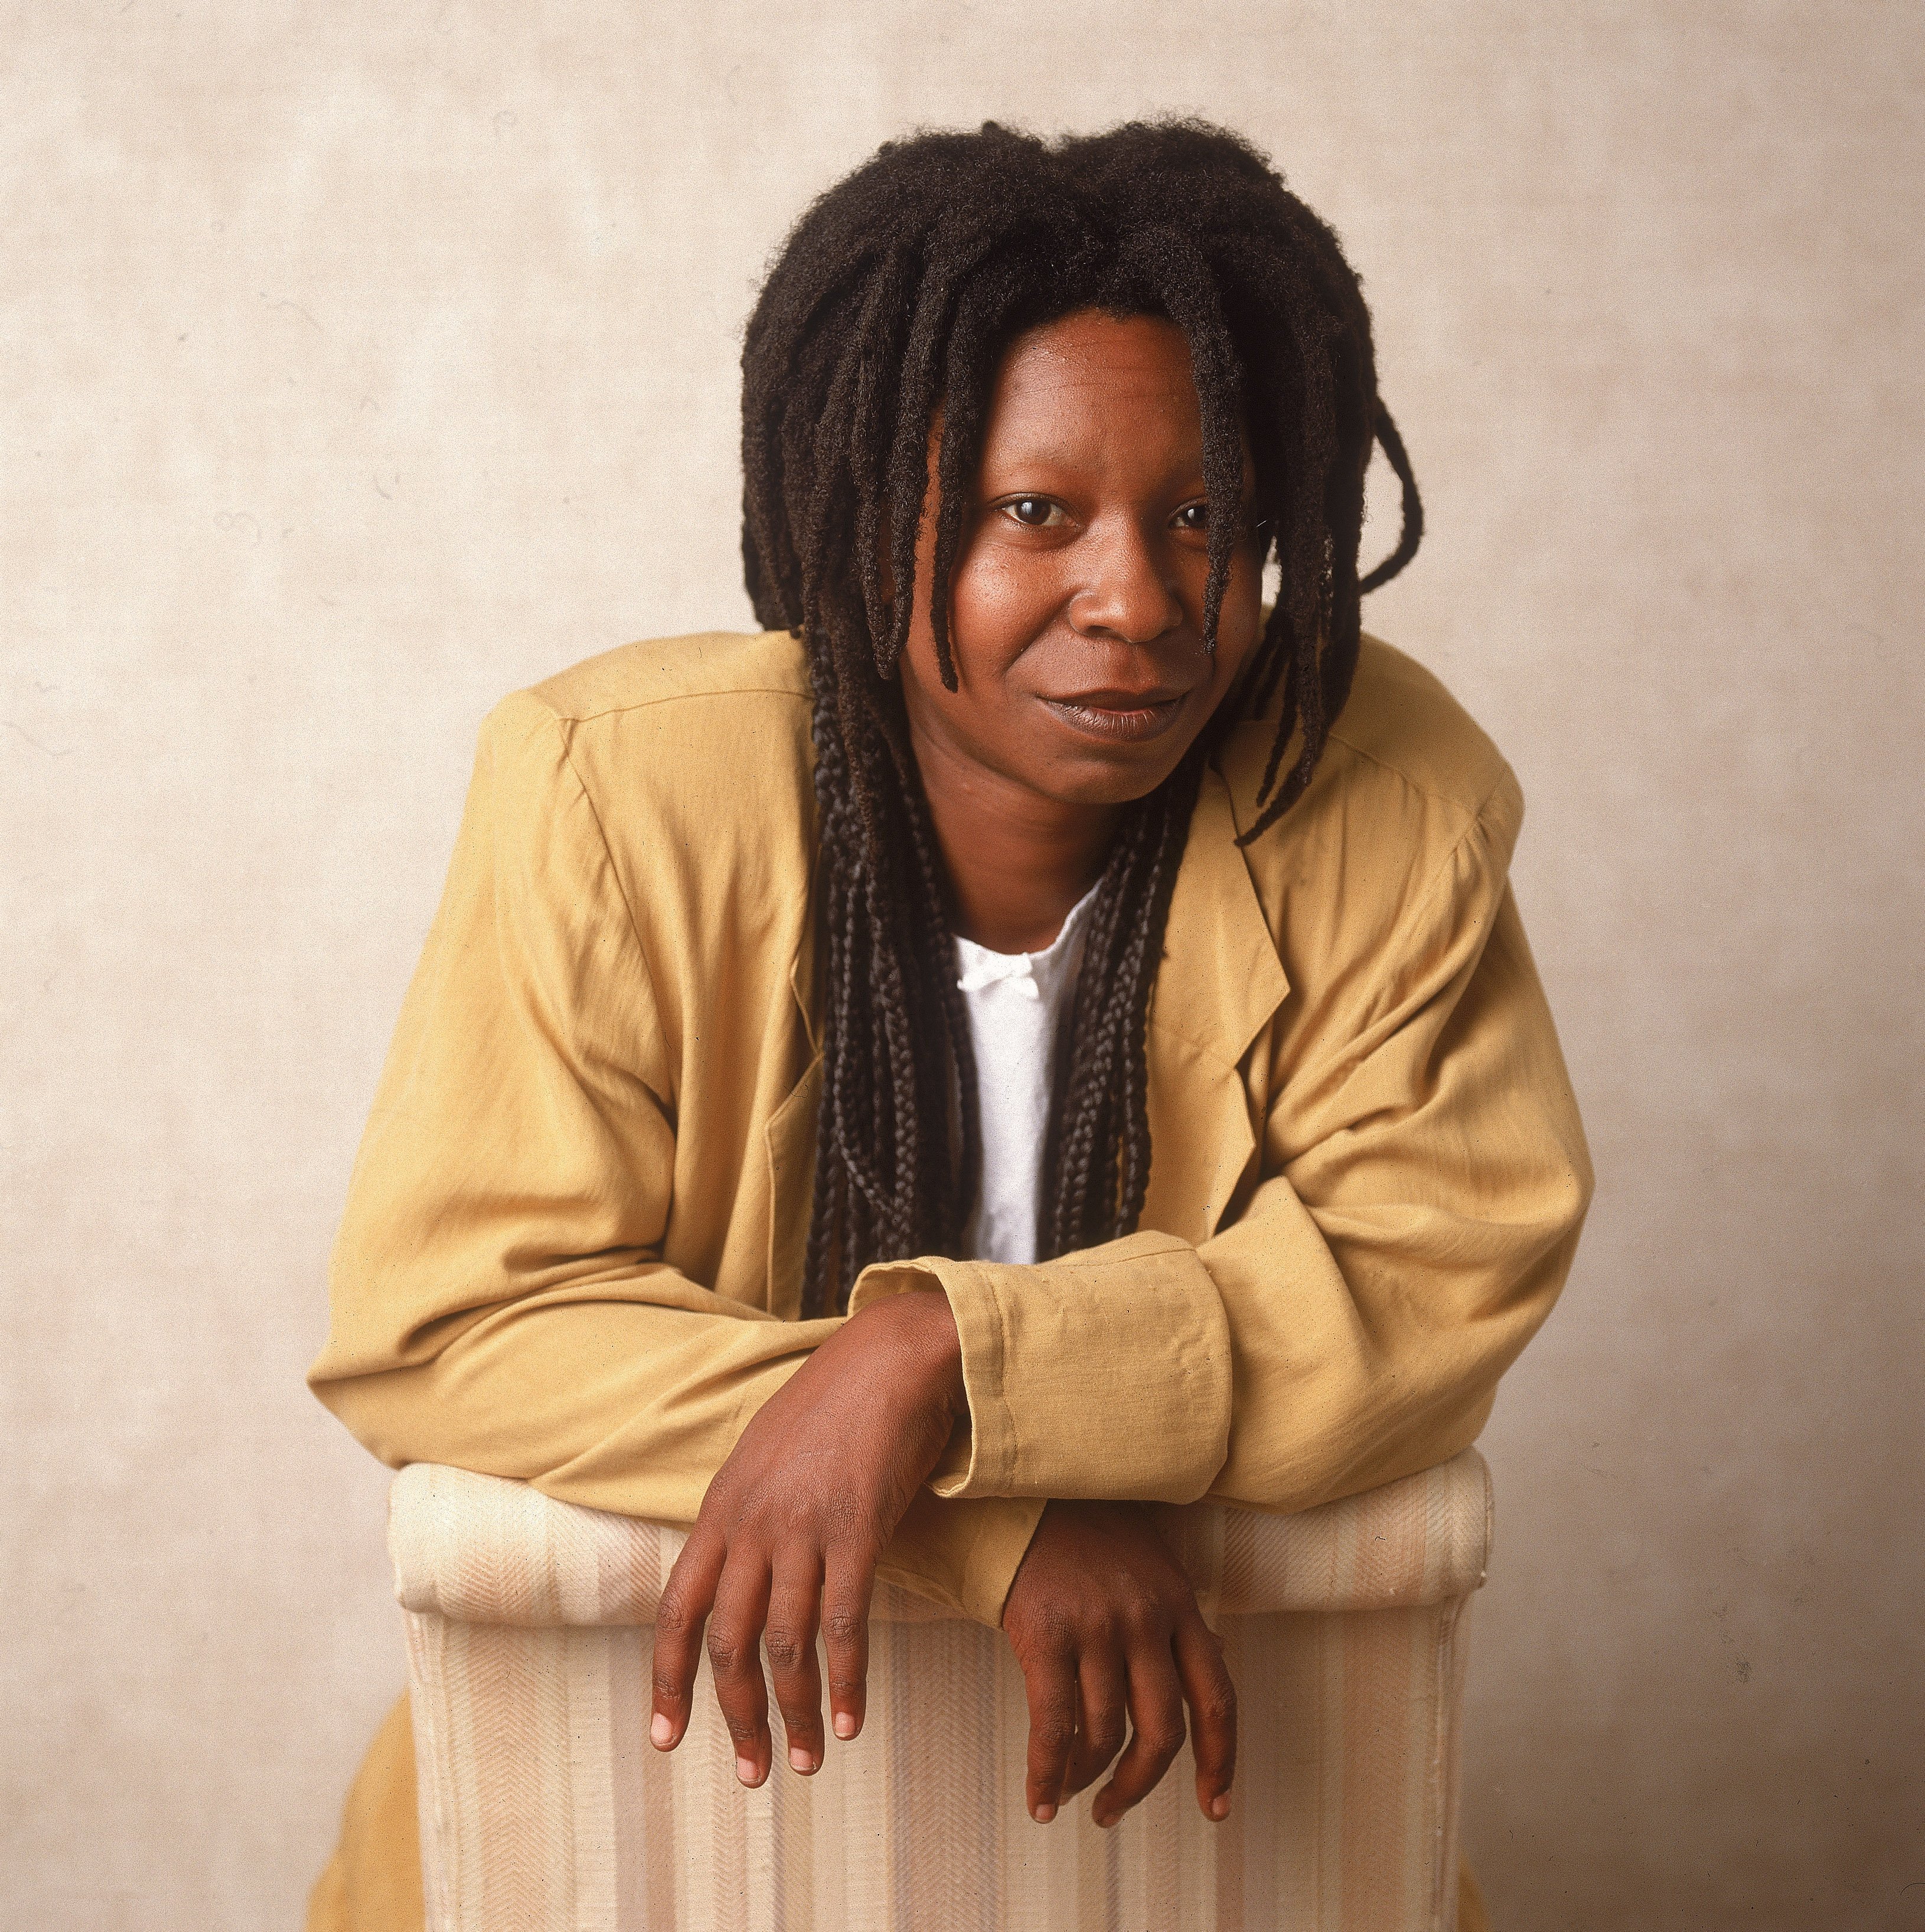 Studio portrait of Whoopi Goldberg leaning on a chair, 1988. |Photo: Getty Images